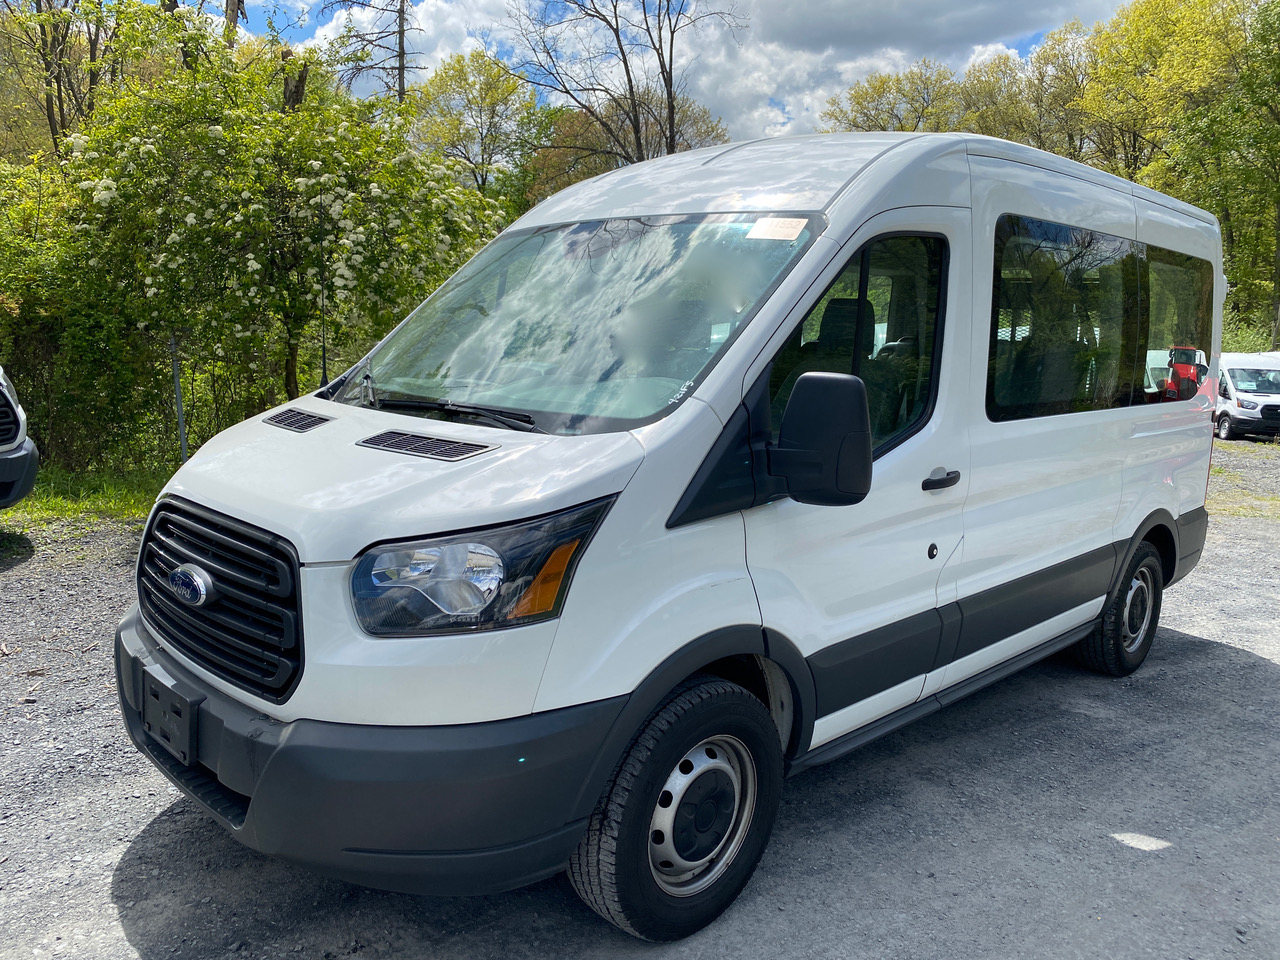 Pre Owned 2018 Ford Transit 150 Wagon | In Stock | Inventory of Custom  Mobility Vehicles | TCI Mobility Wheelchair Accessible Vans